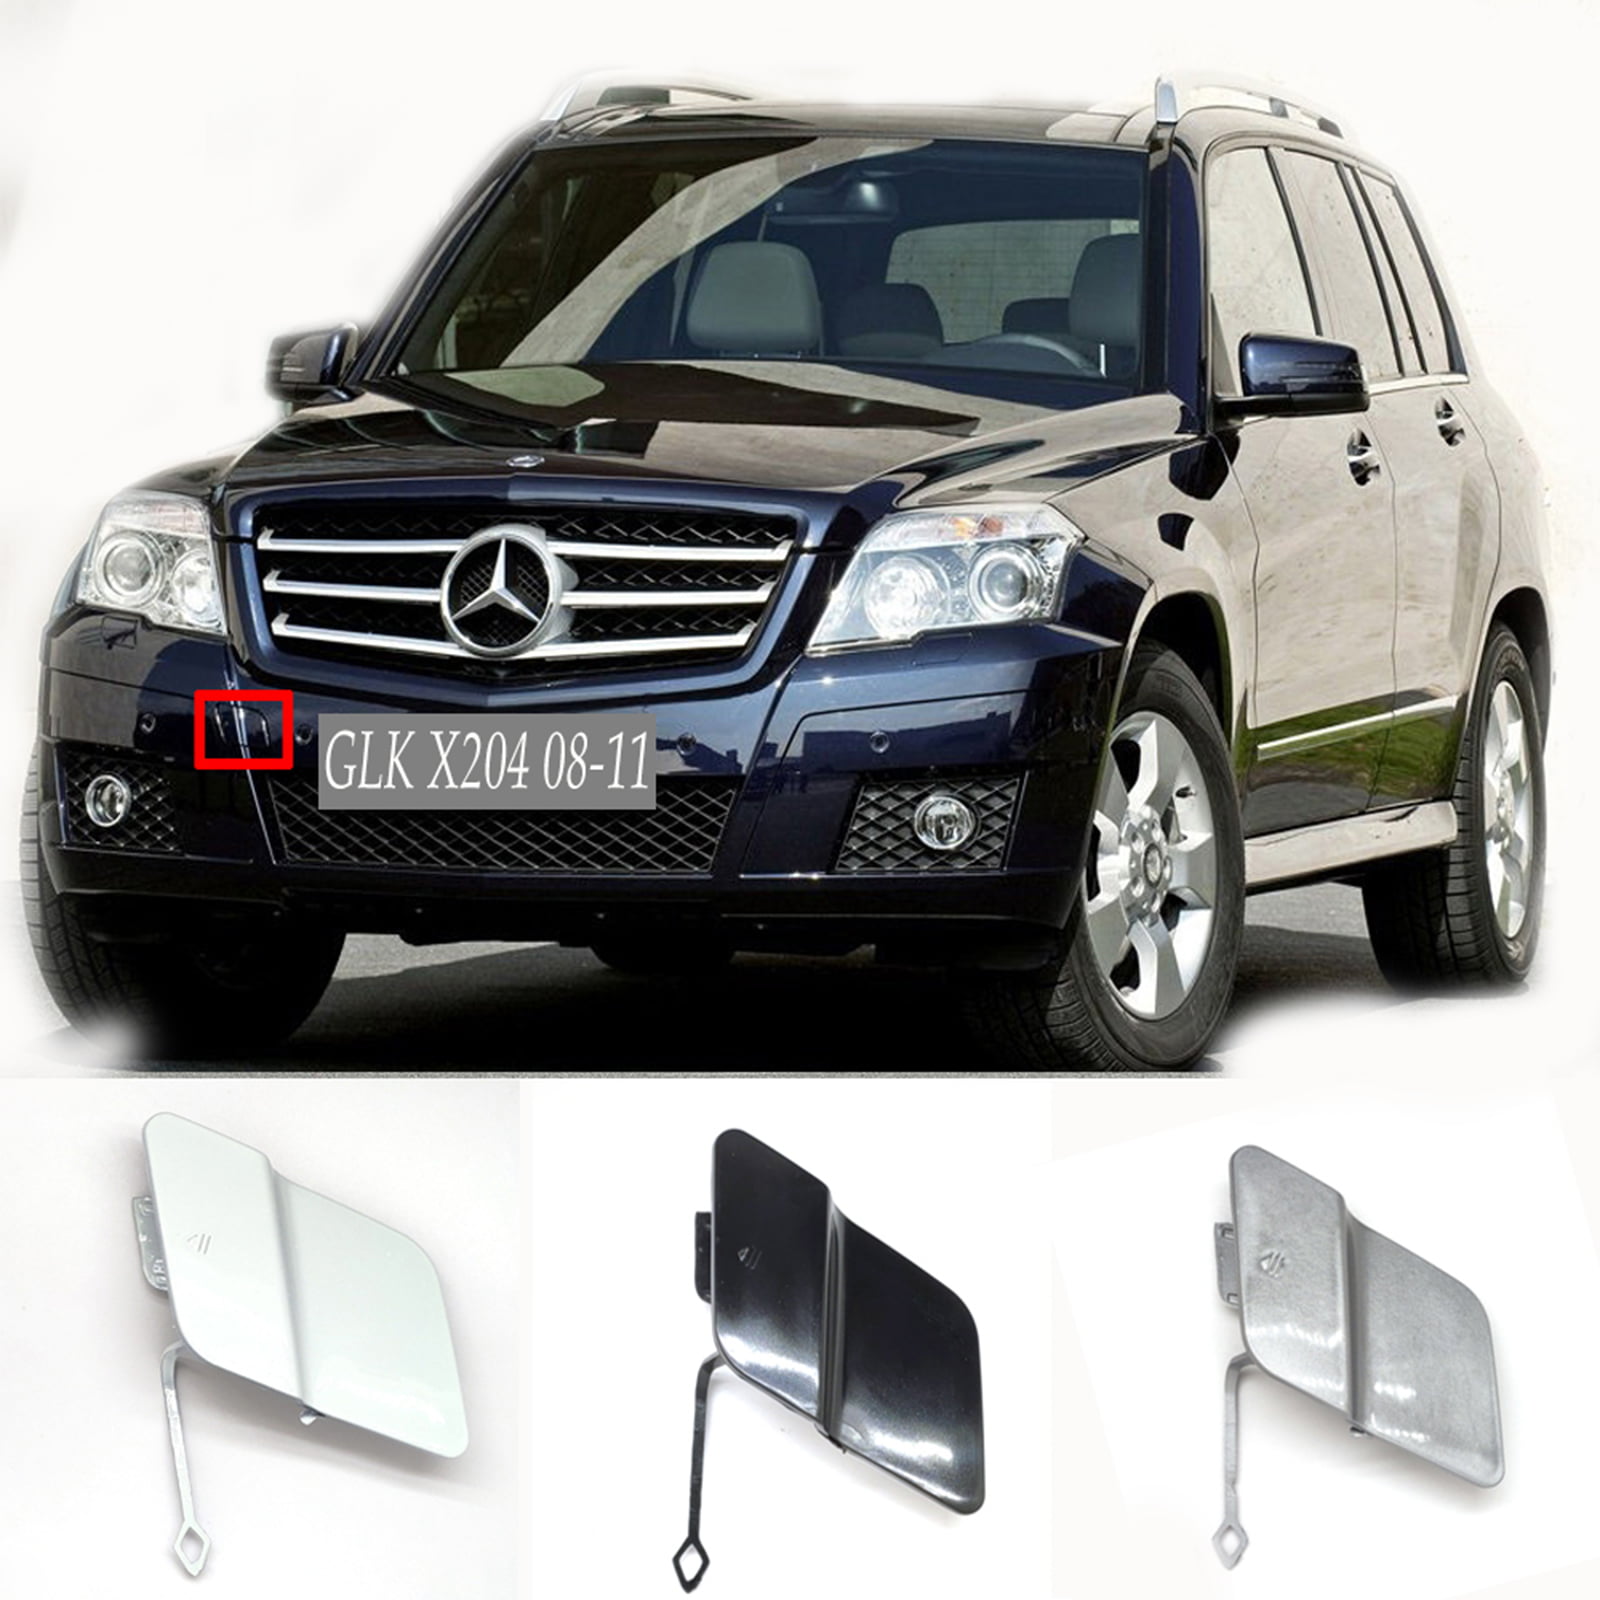 Create your own cover fitted for Mercedes-Benz GLK X204 2008-2015 car cover, Tailored especially for you